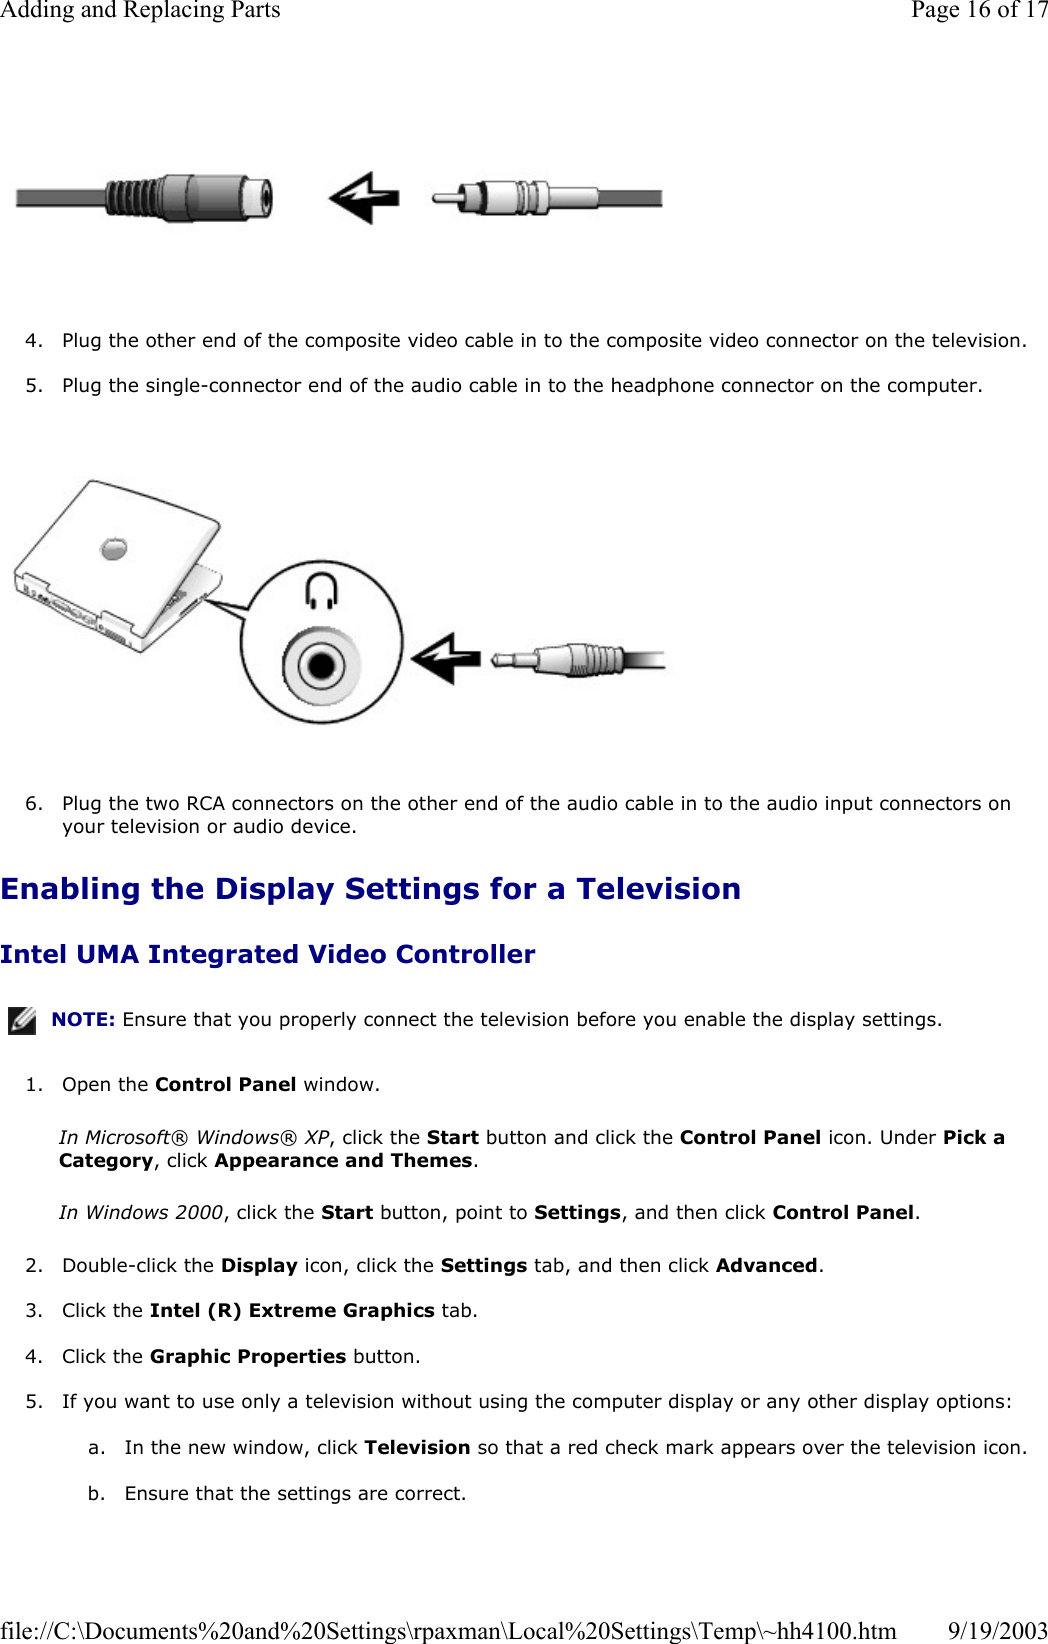   4. Plug the other end of the composite video cable in to the composite video connector on the television.  5. Plug the single-connector end of the audio cable in to the headphone connector on the computer.     6. Plug the two RCA connectors on the other end of the audio cable in to the audio input connectors on your television or audio device.  Enabling the Display Settings for a Television Intel UMA Integrated Video Controller 1. Open the Control Panel window.  In Microsoft® Windows® XP, click the Start button and click the Control Panel icon. Under Pick a Category, click Appearance and Themes. In Windows 2000, click the Start button, point to Settings, and then click Control Panel. 2. Double-click the Display icon, click the Settings tab, and then click Advanced.  3. Click the Intel (R) Extreme Graphics tab.  4. Click the Graphic Properties button.  5. If you want to use only a television without using the computer display or any other display options:  a. In the new window, click Television so that a red check mark appears over the television icon.   b. Ensure that the settings are correct.  NOTE: Ensure that you properly connect the television before you enable the display settings.Page 16 of 17Adding and Replacing Parts9/19/2003file://C:\Documents%20and%20Settings\rpaxman\Local%20Settings\Temp\~hh4100.htm